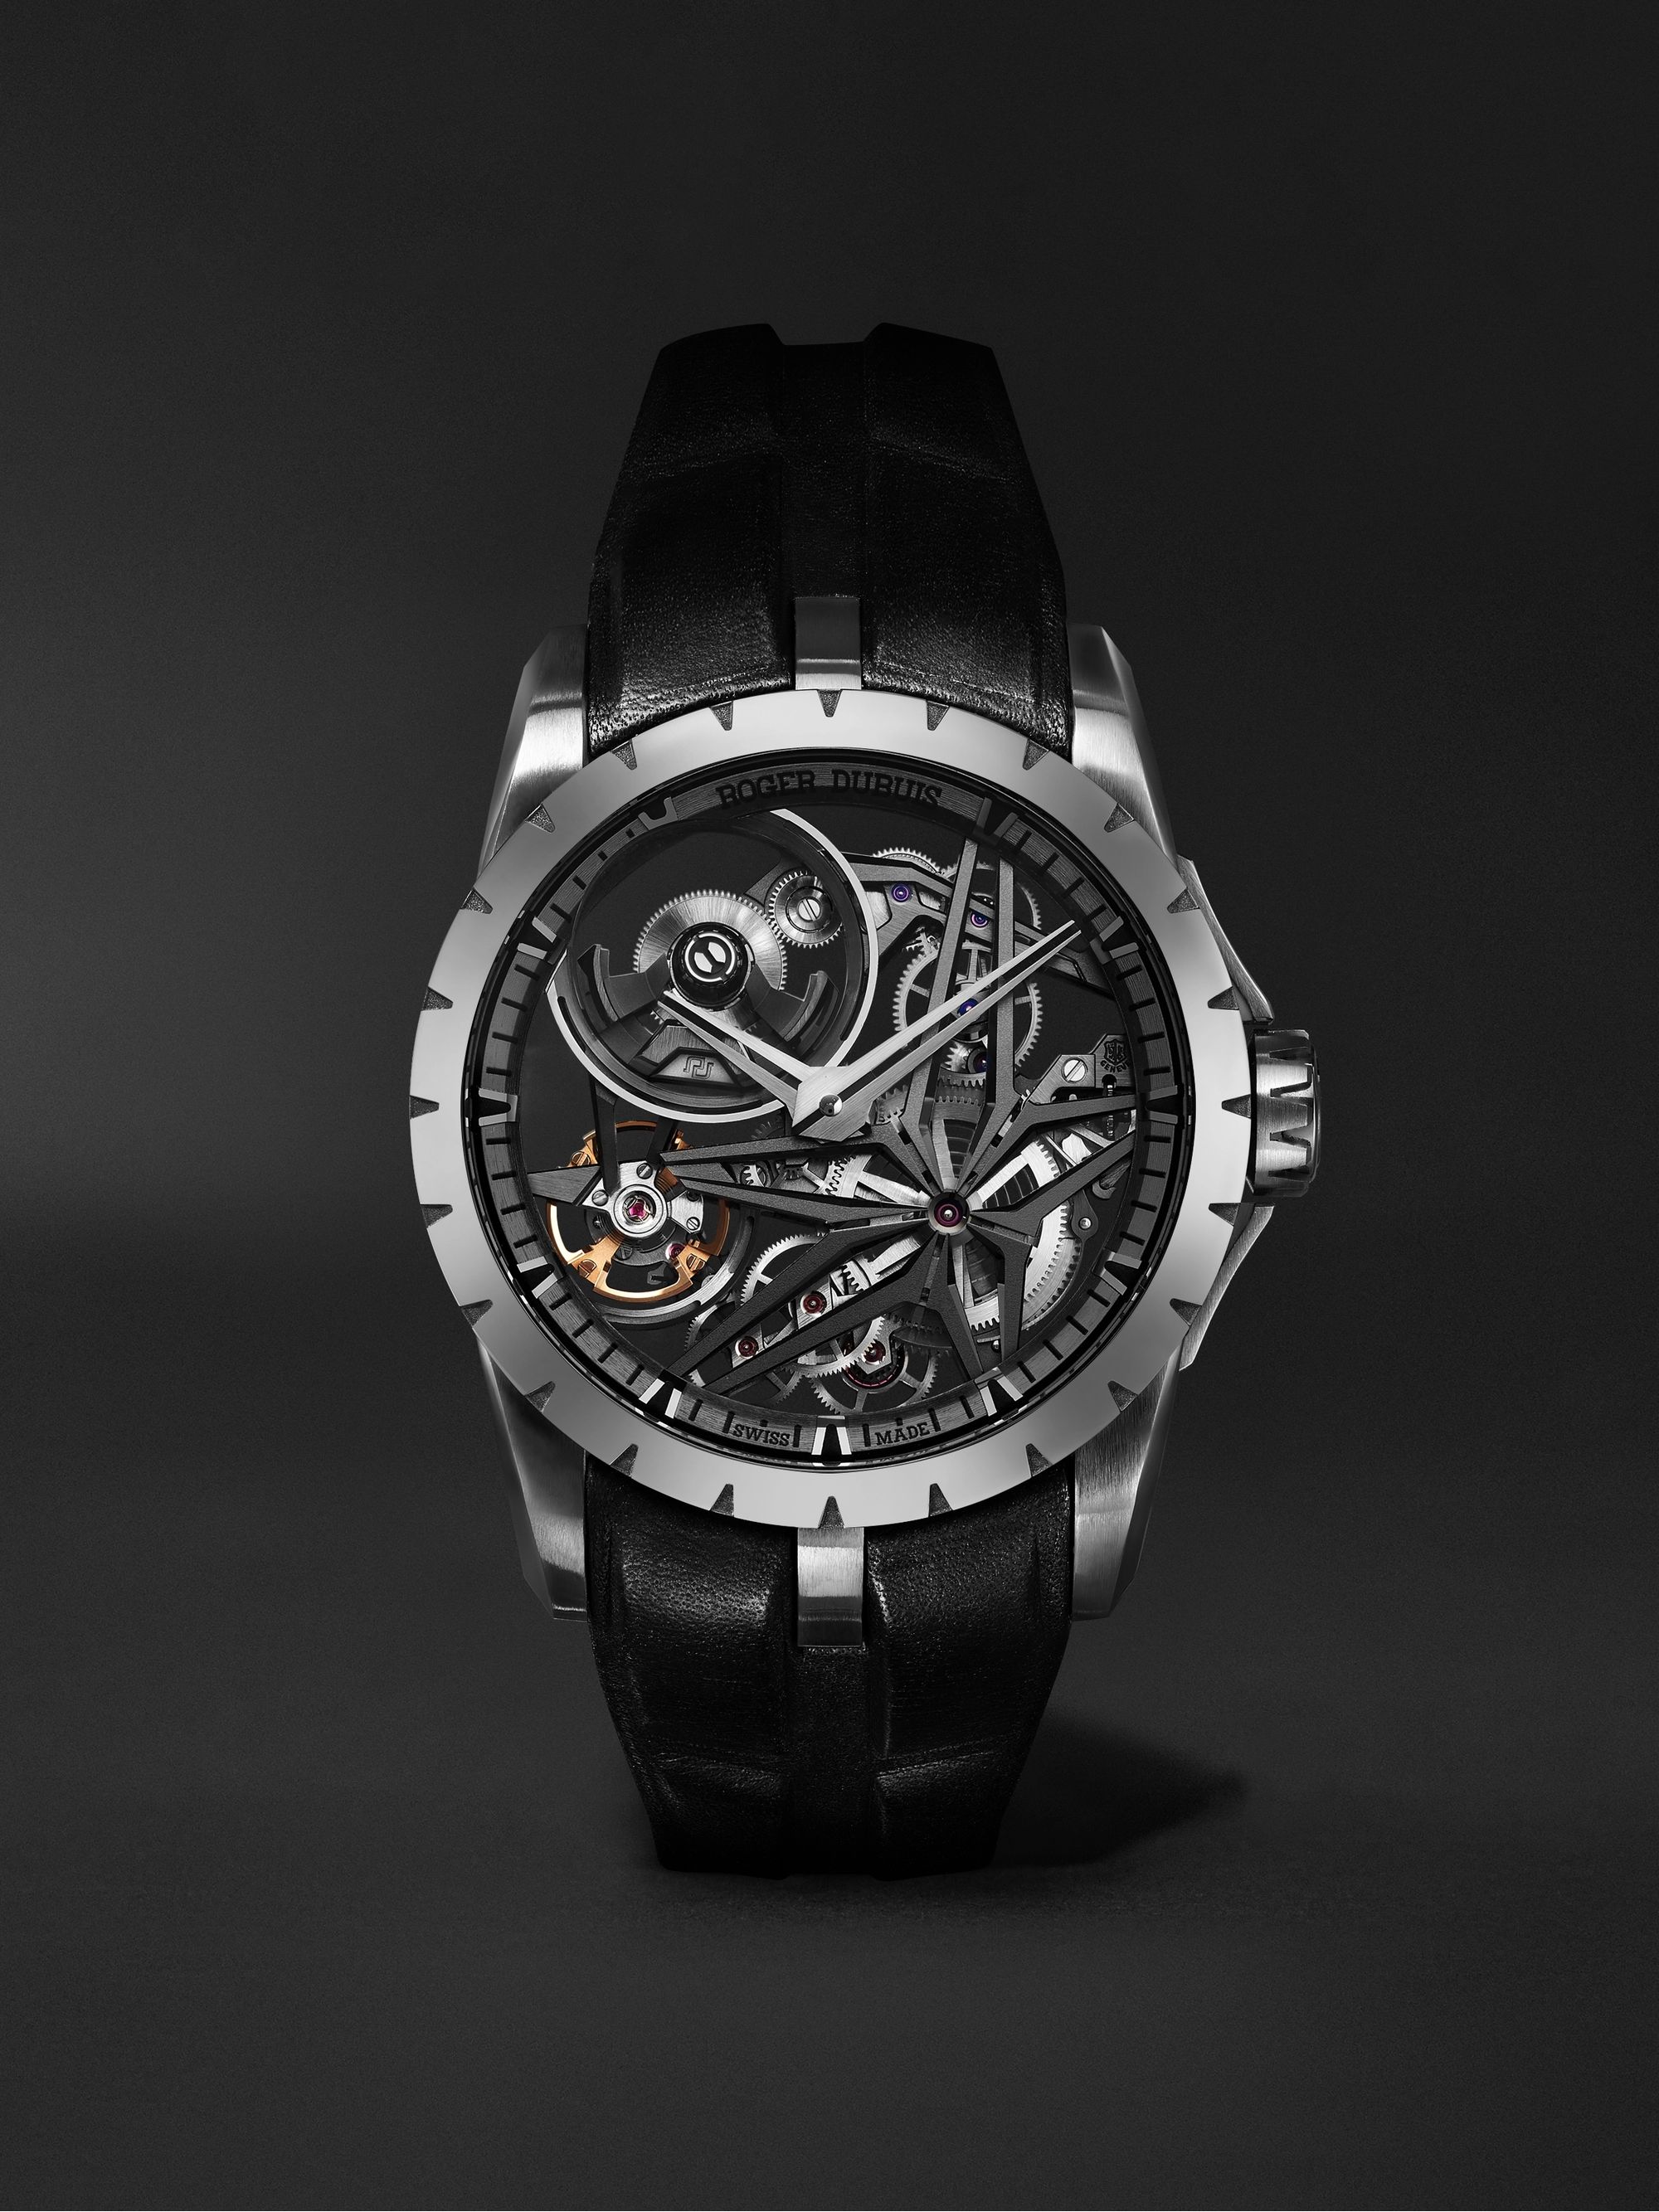 ROGER DUBUIS Excalibur MB Automatic Skeleton 42mm Ceramic and Leather Watch, Ref. No. DBEX0955